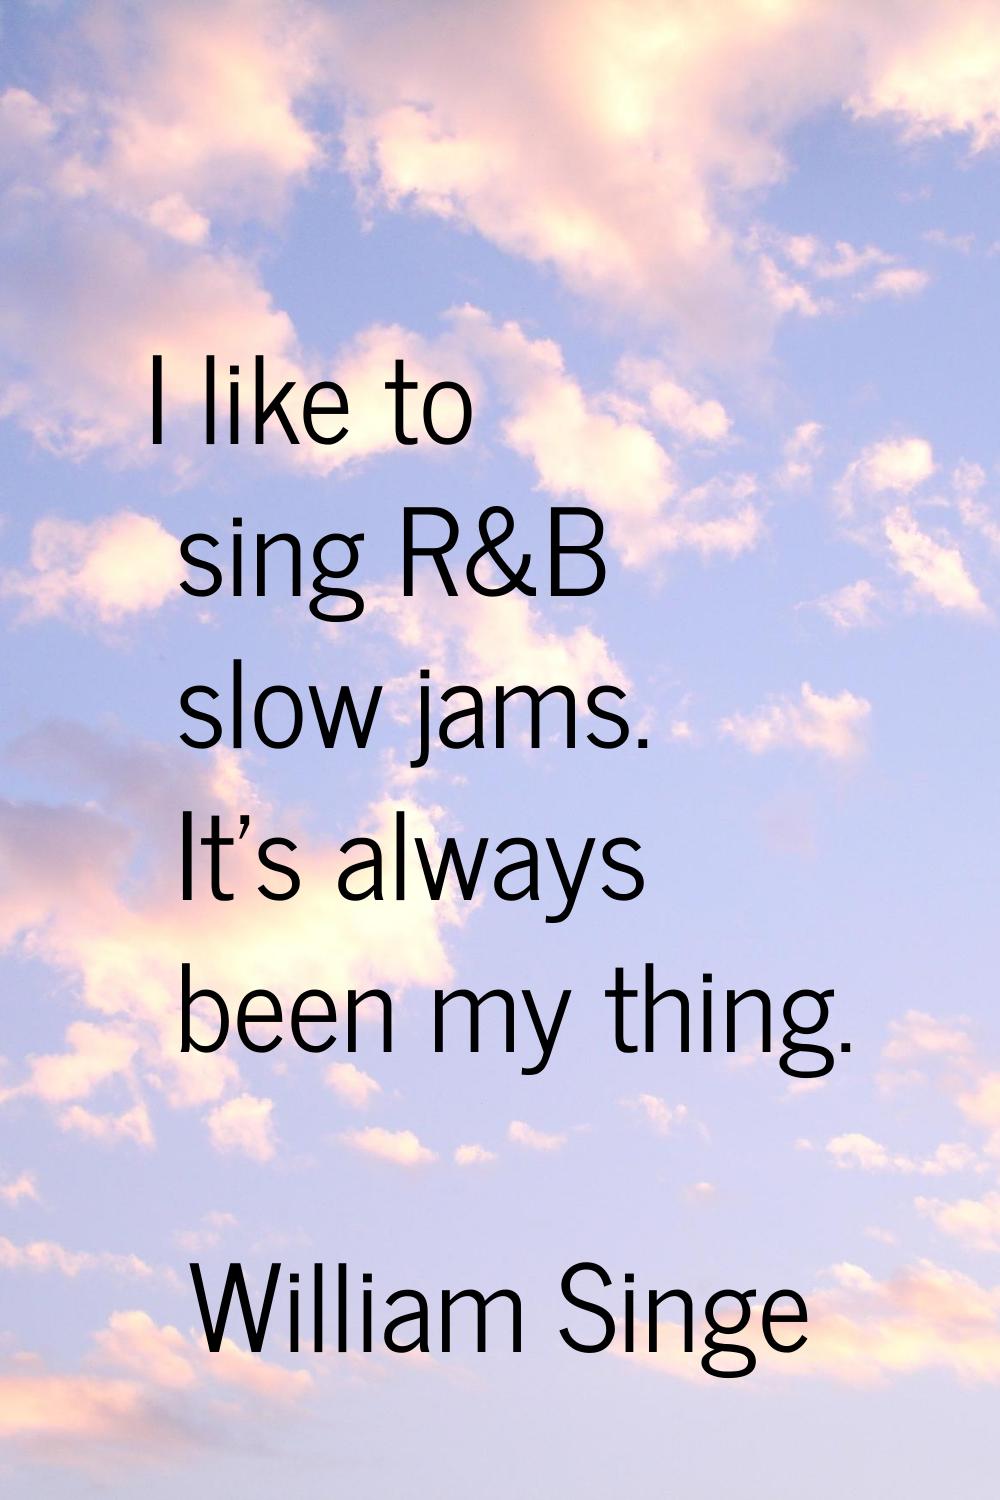 I like to sing R&B slow jams. It's always been my thing.